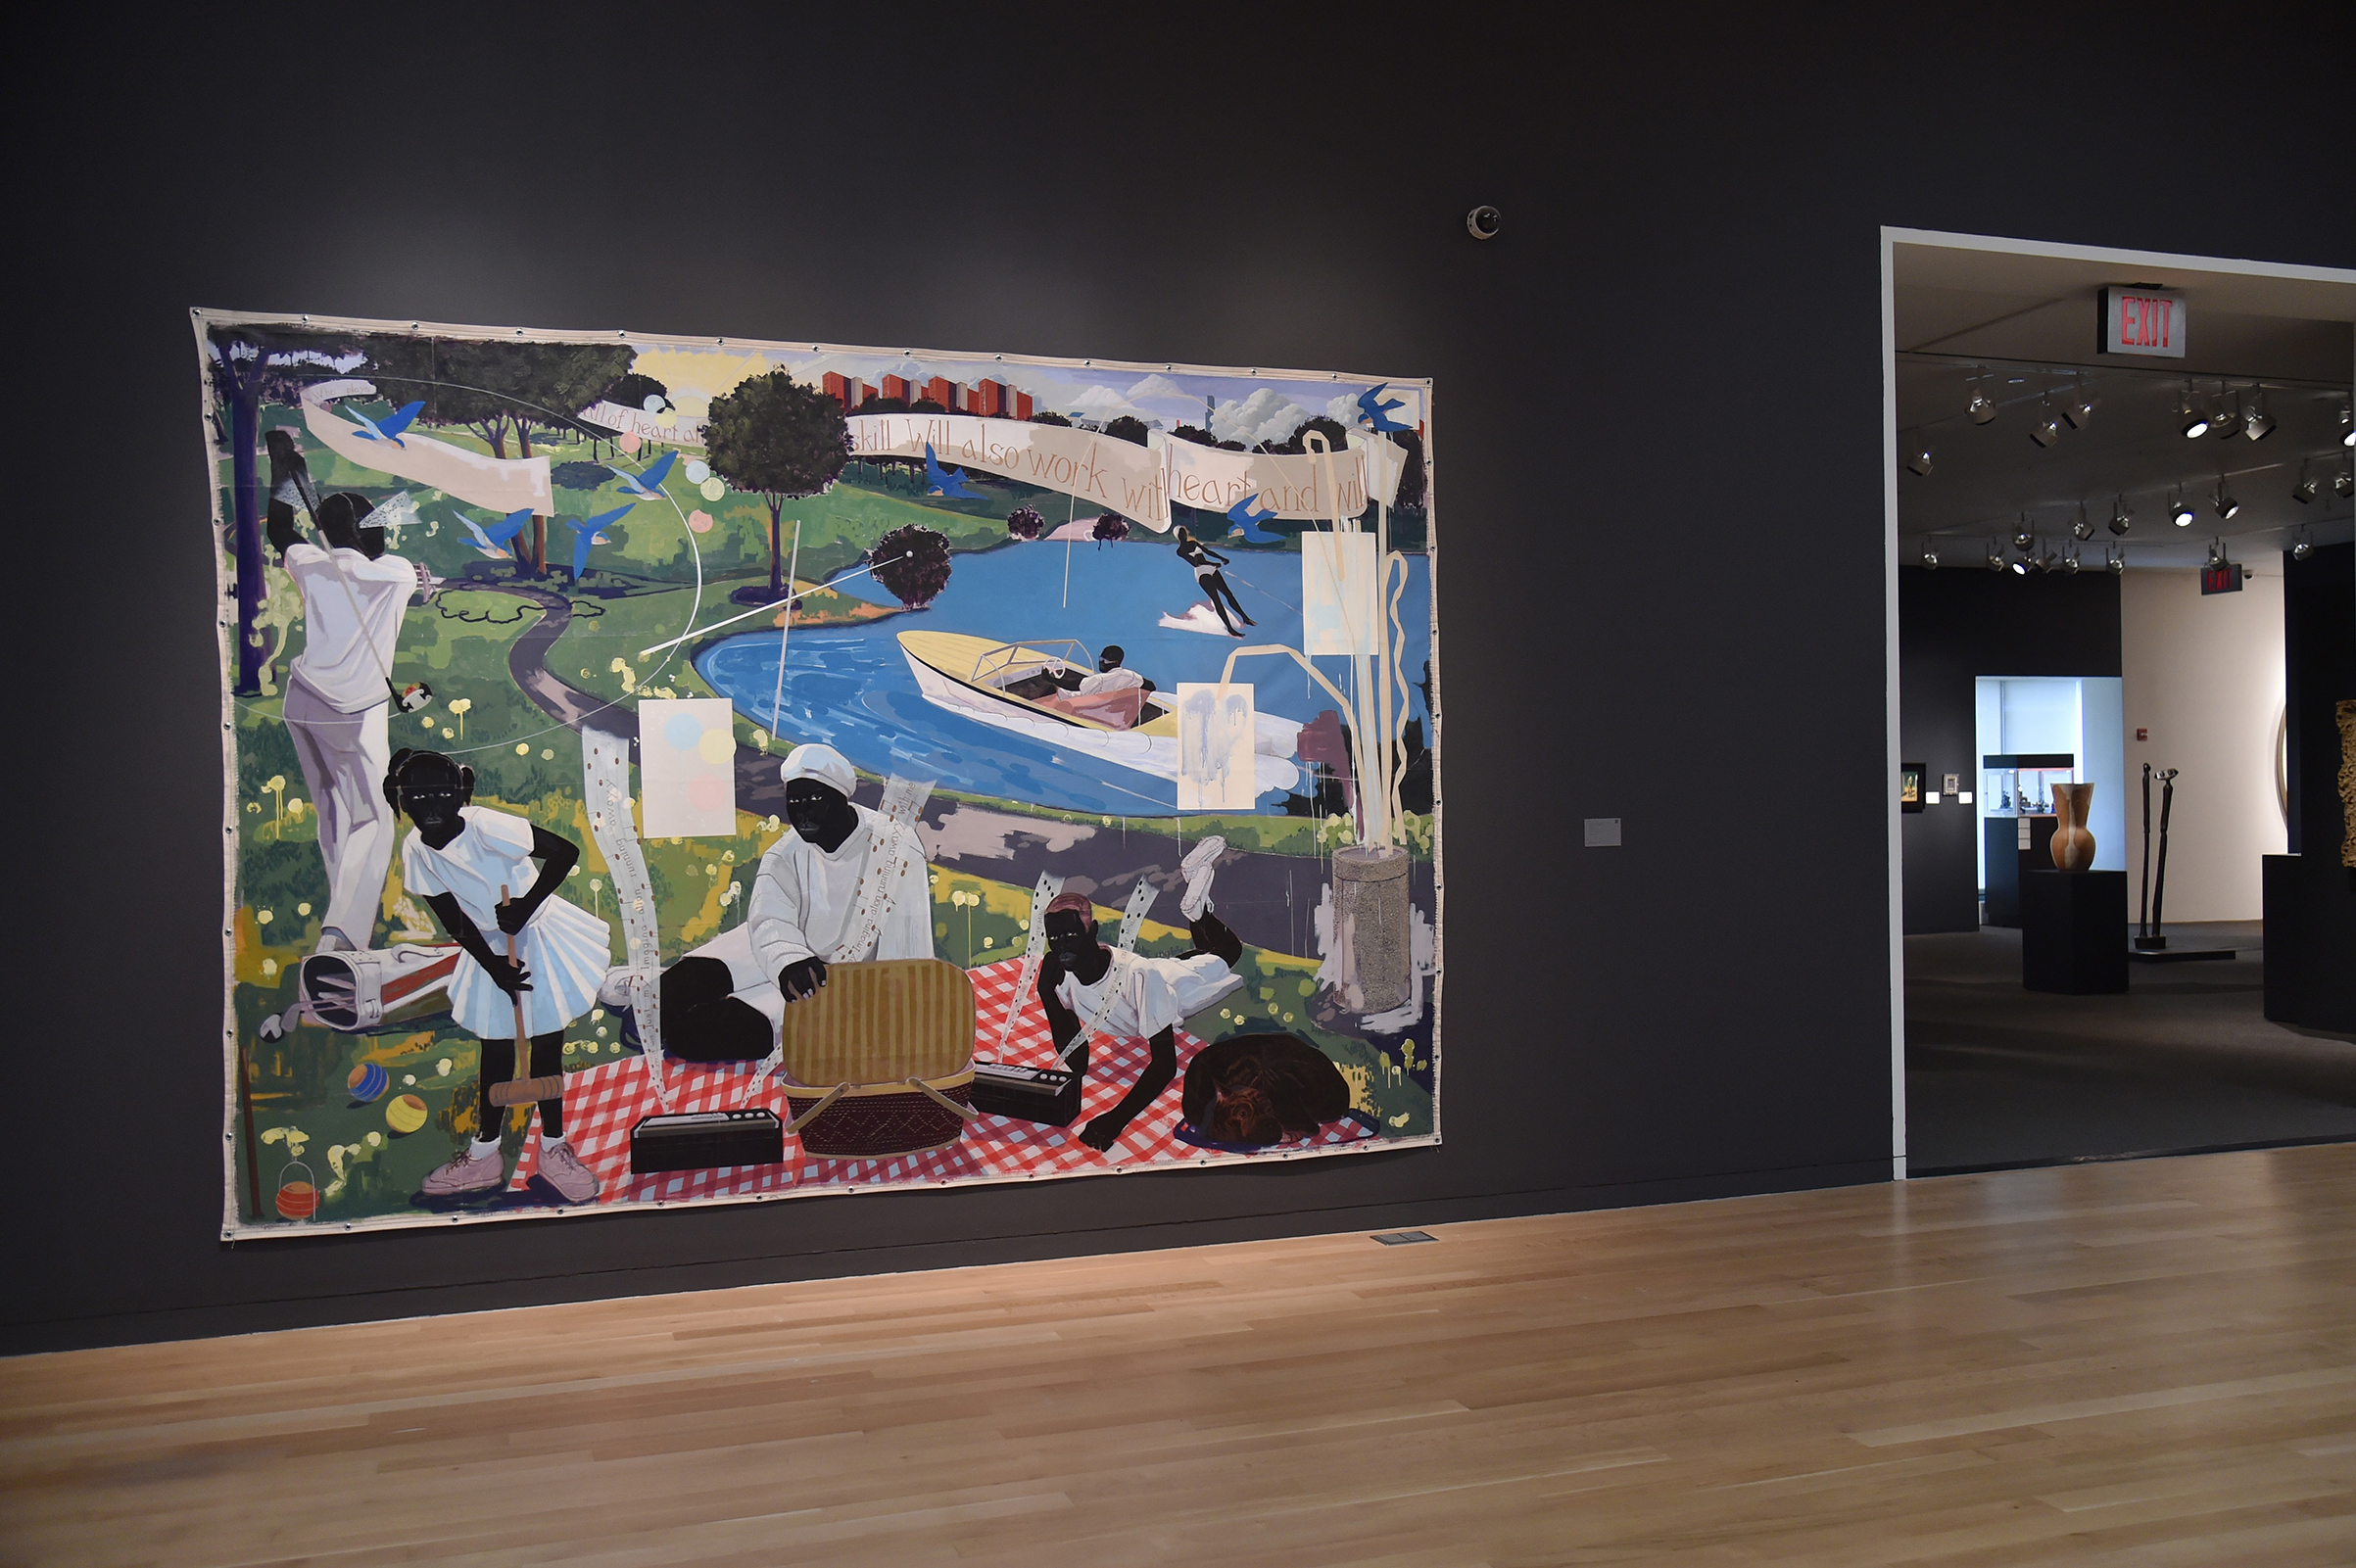 The rapper and impresario P. Diddy paid $21.1 million for  Past Times  by Kerry James Marshall  on May 16. That's the highest price ever for a work by a living African American artist.